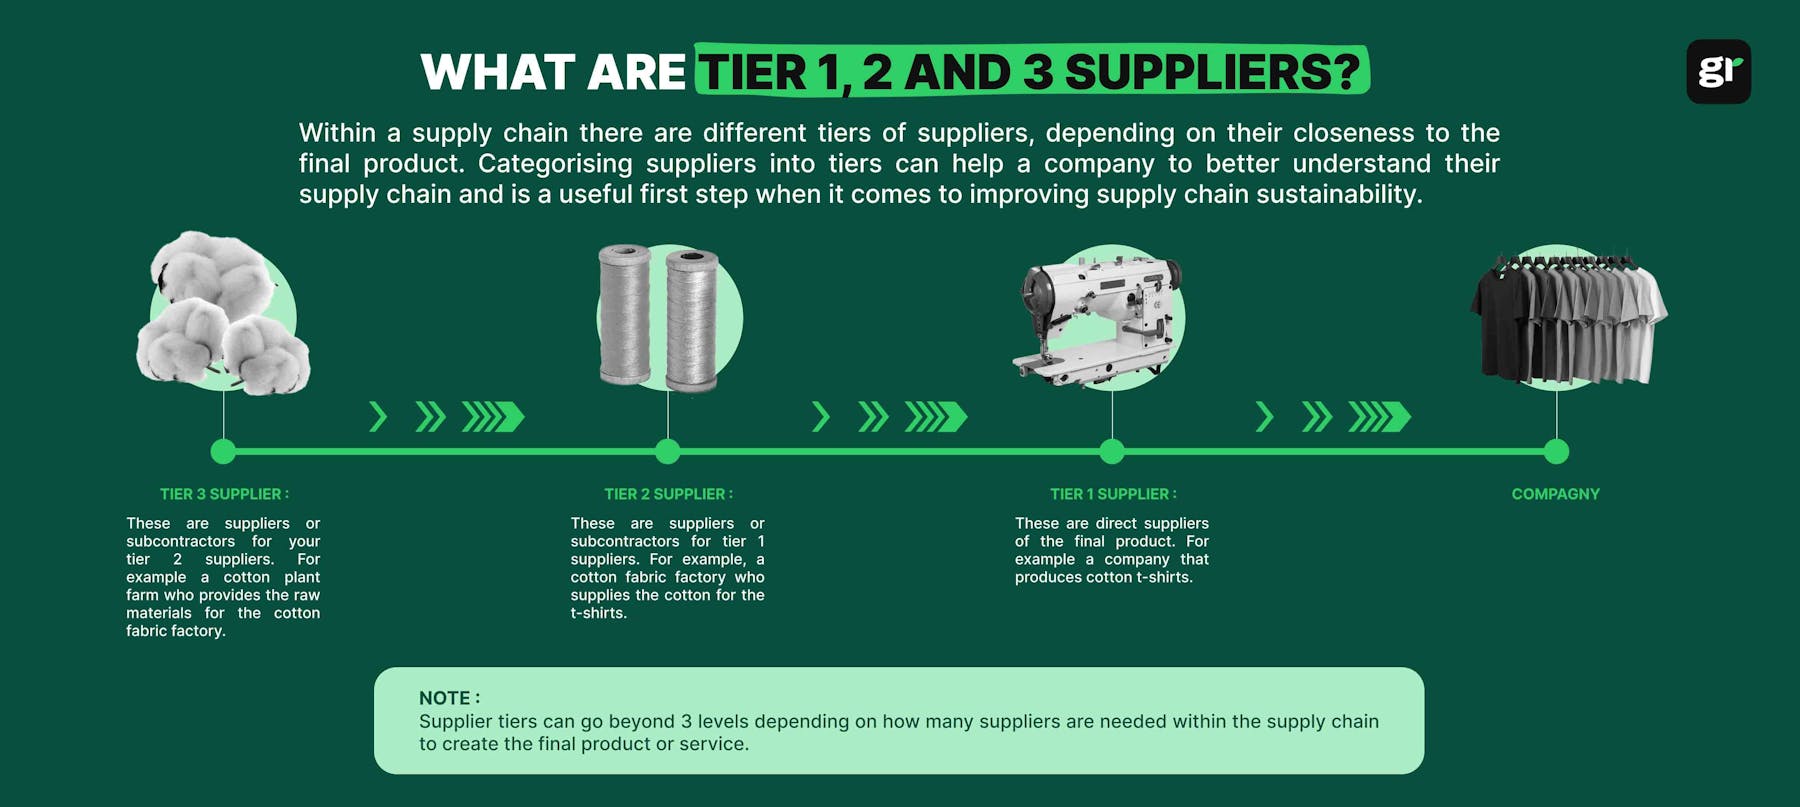 tier suppliers infographic